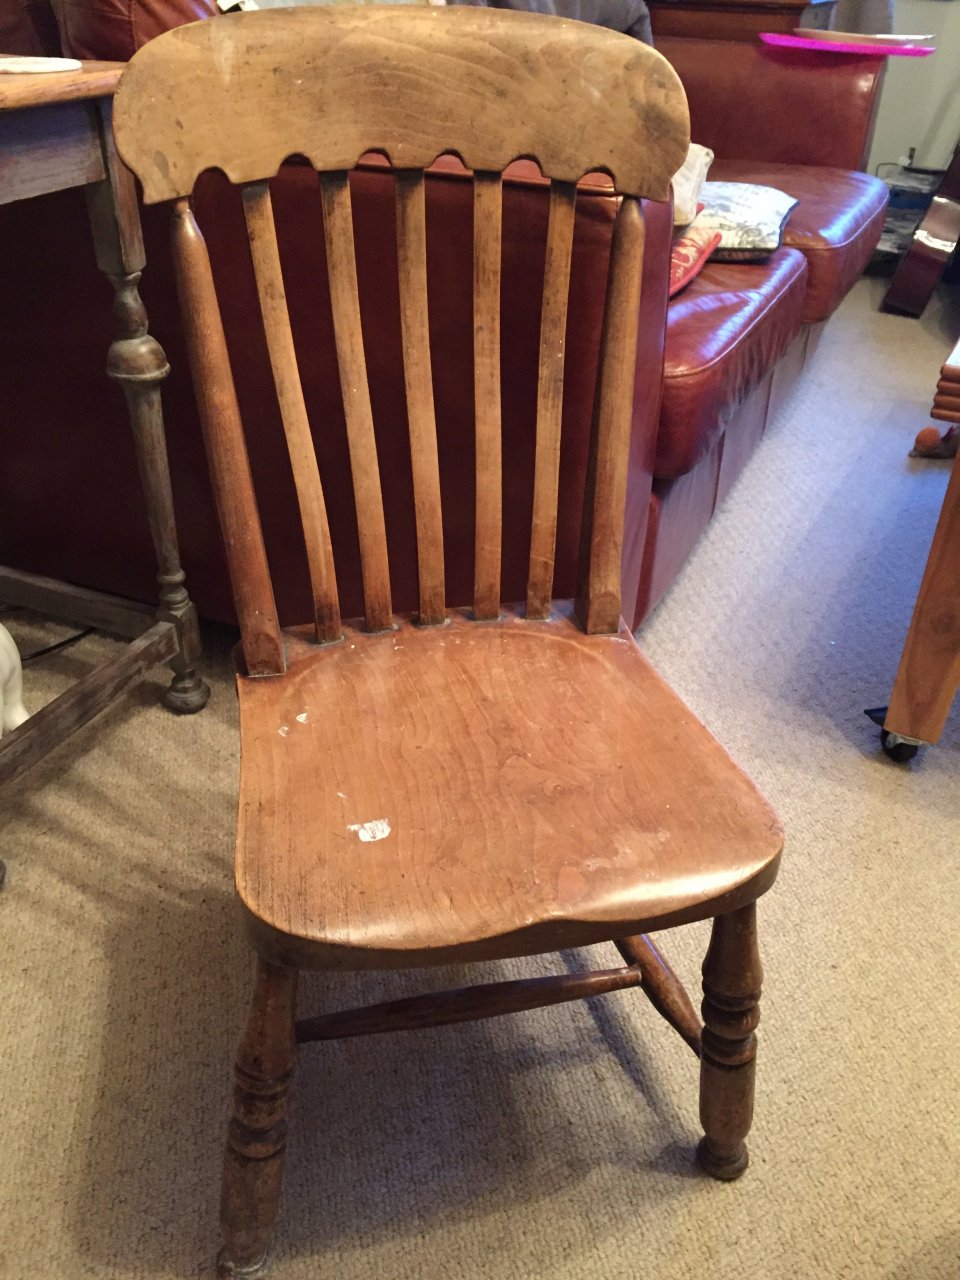 Old Solid Wooden Chair | My Antique Furniture Collection